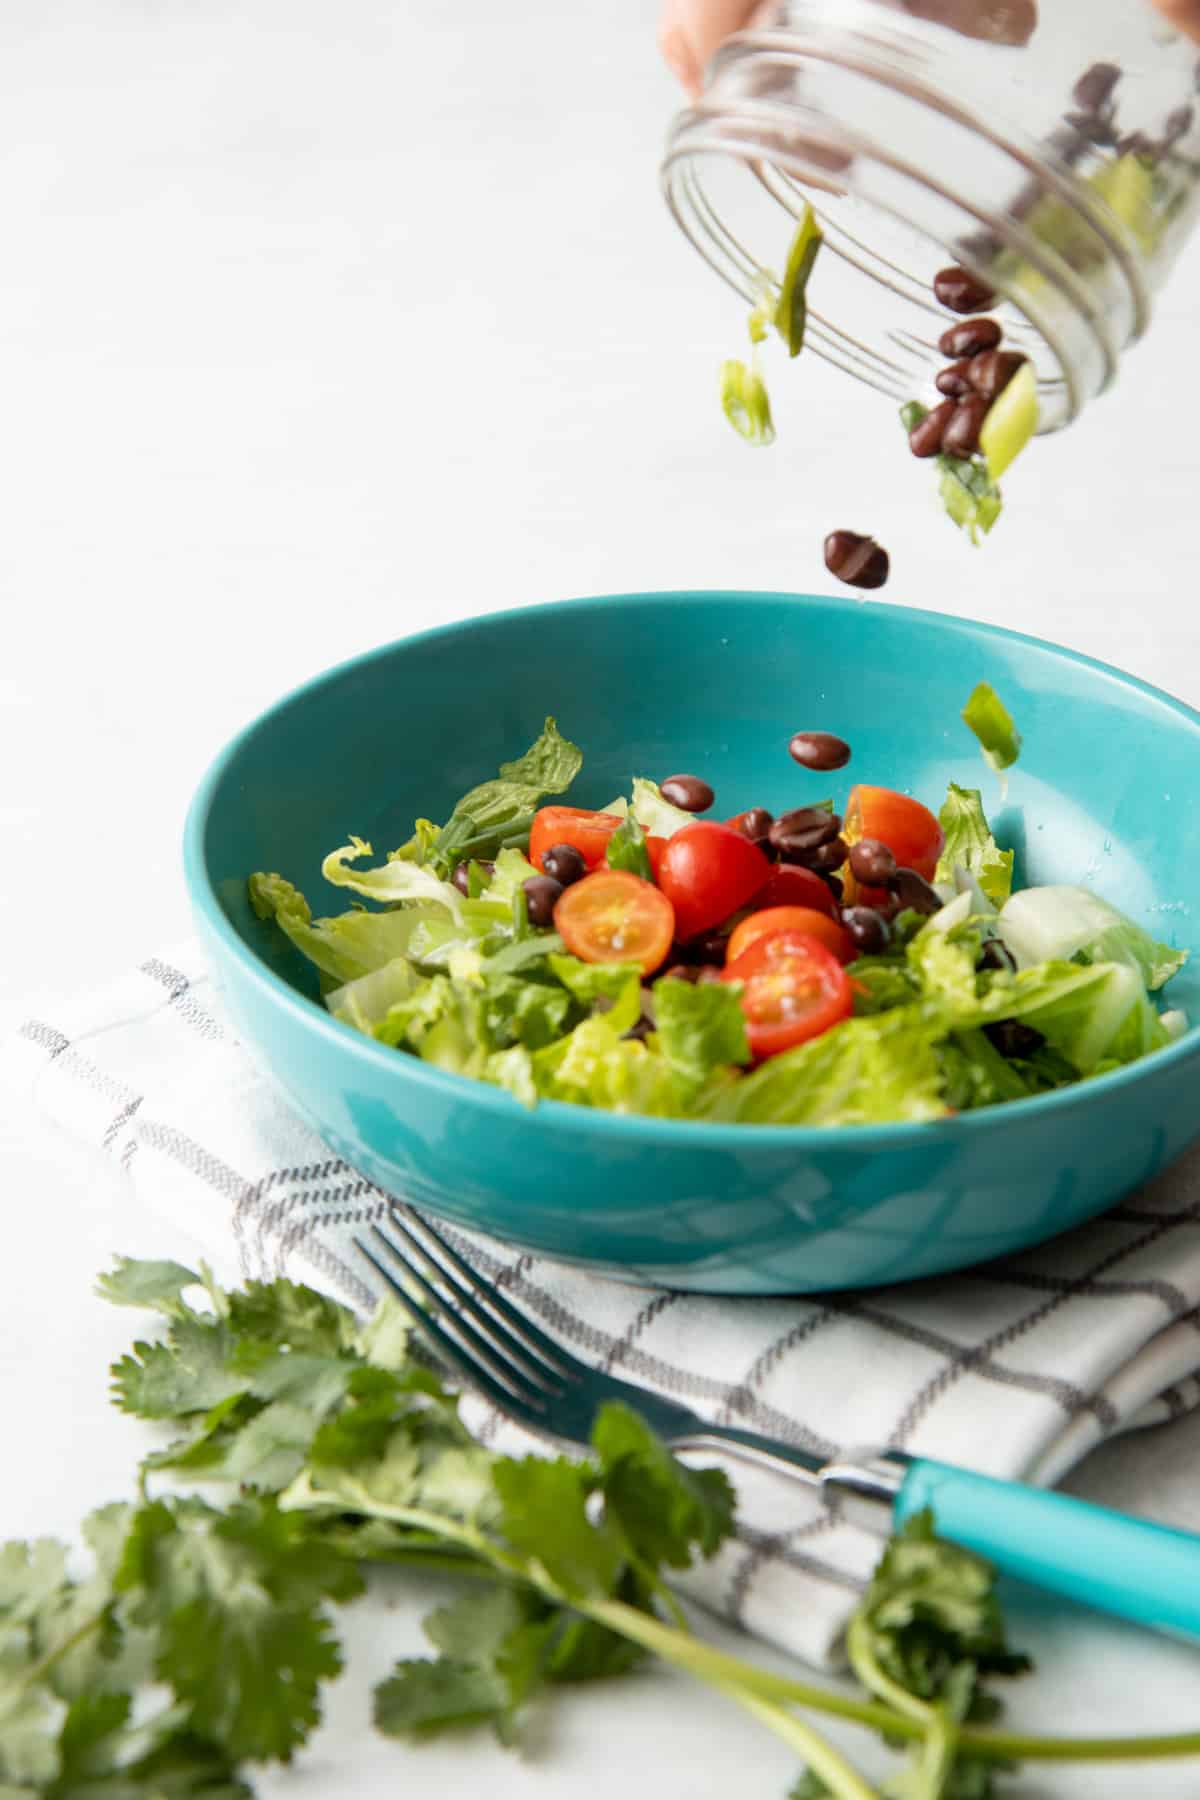 Black beans and lettuce pour out of a jar into a teal bowl. The bowl is filled with lettuce, tomatoes, and black beans.